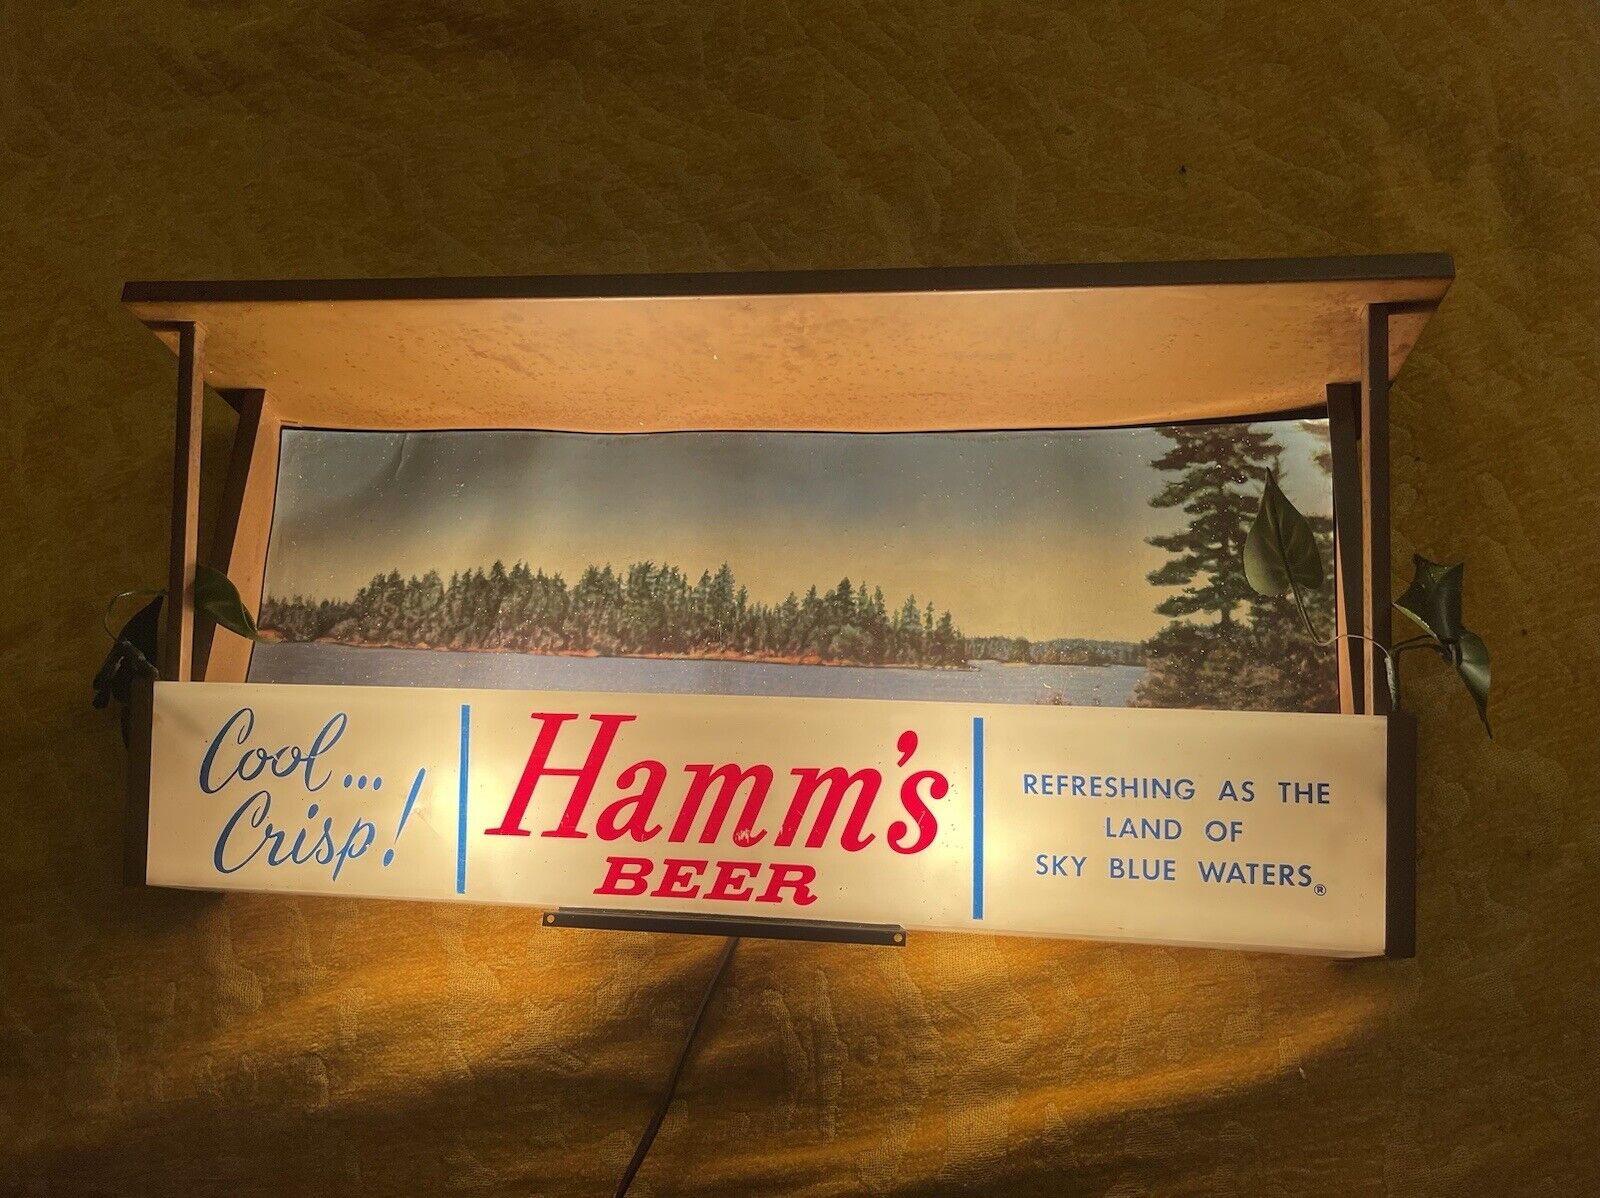 Rare Vintage Hamms Beer Sign - Cool Crisp - Lighted Fathers, Mancave, Scenic